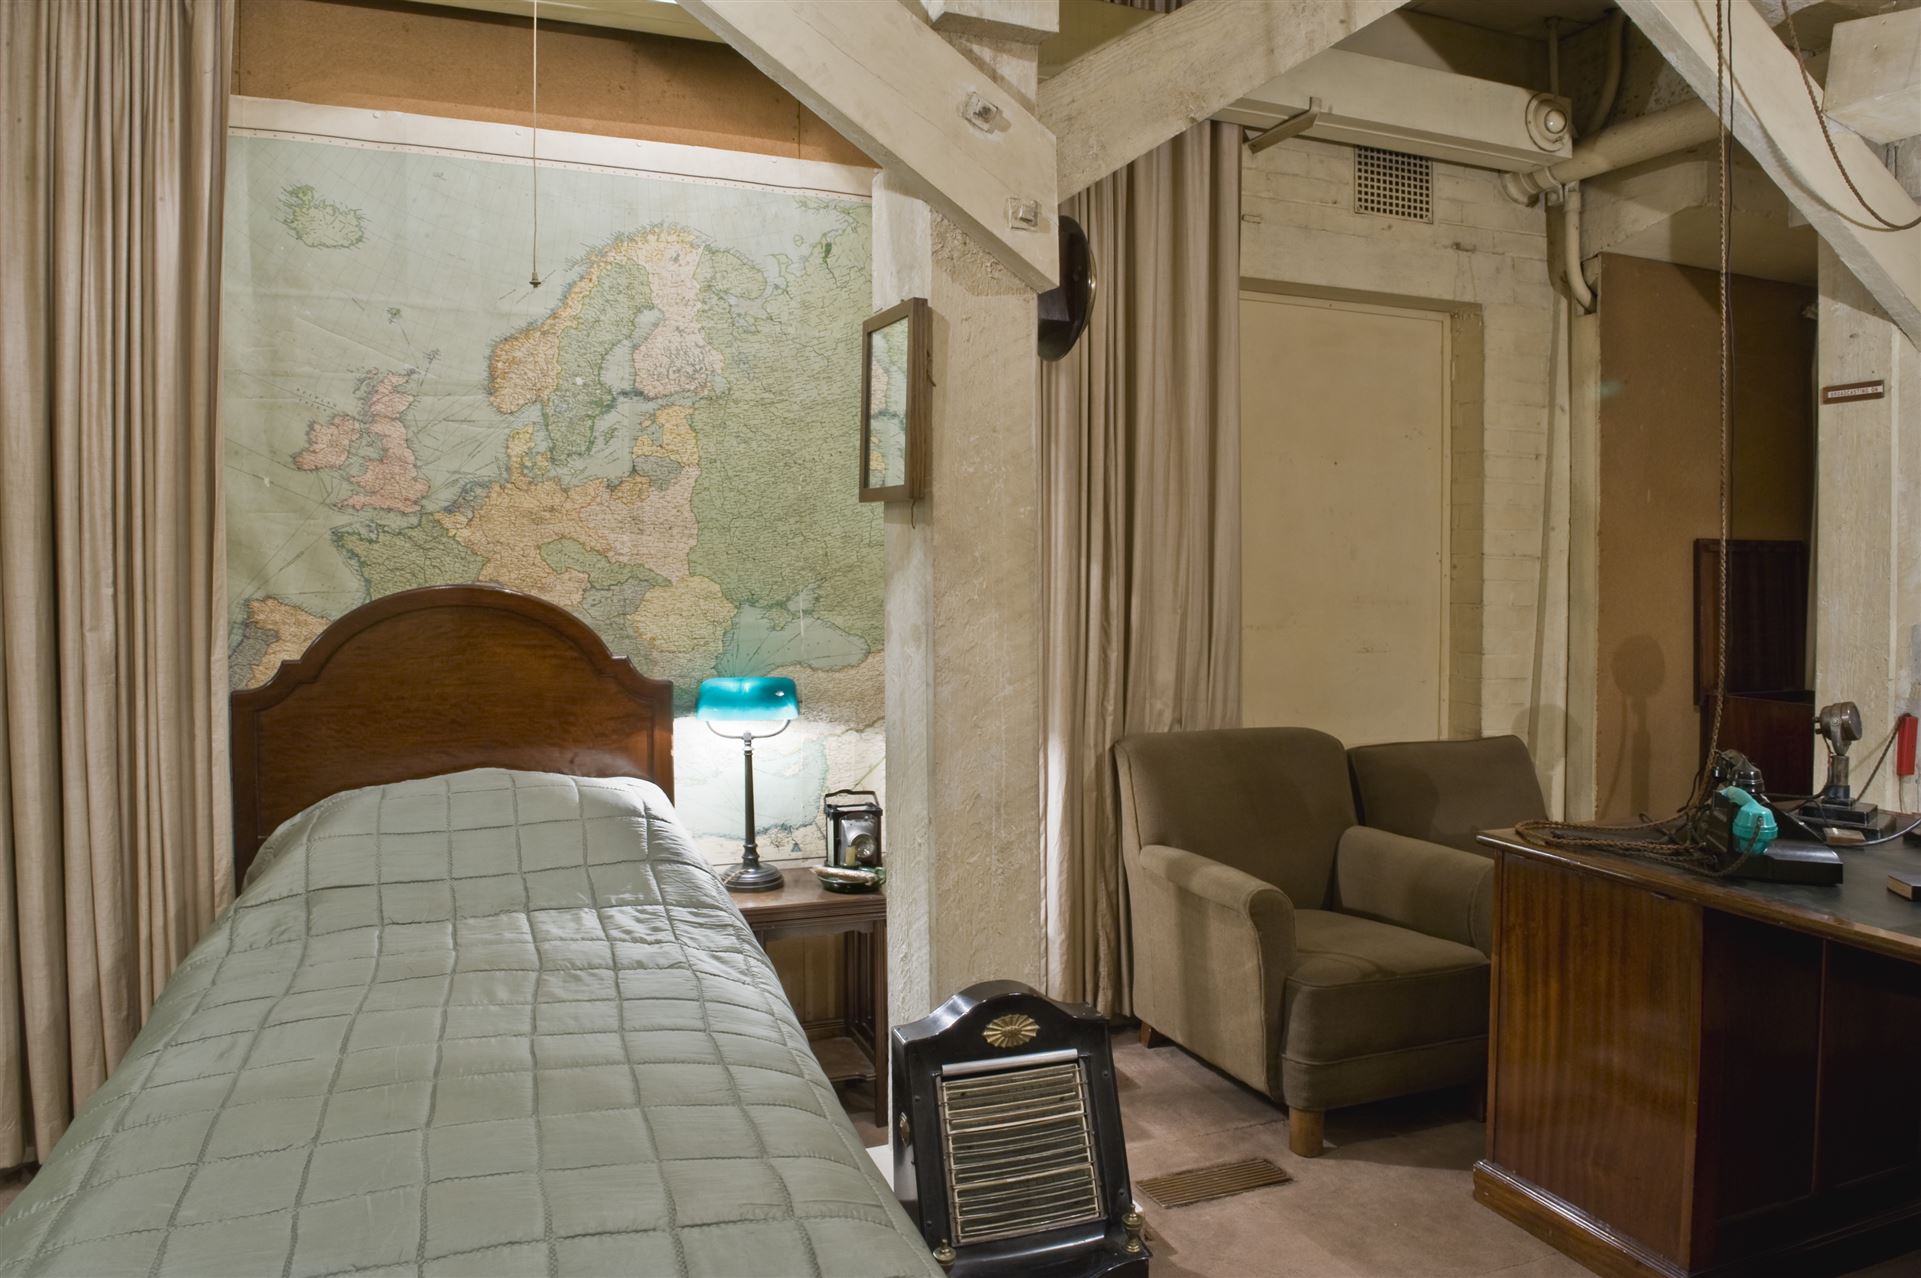  Cabinet War Room Bedroom. By permission of The Imperial War Museums 